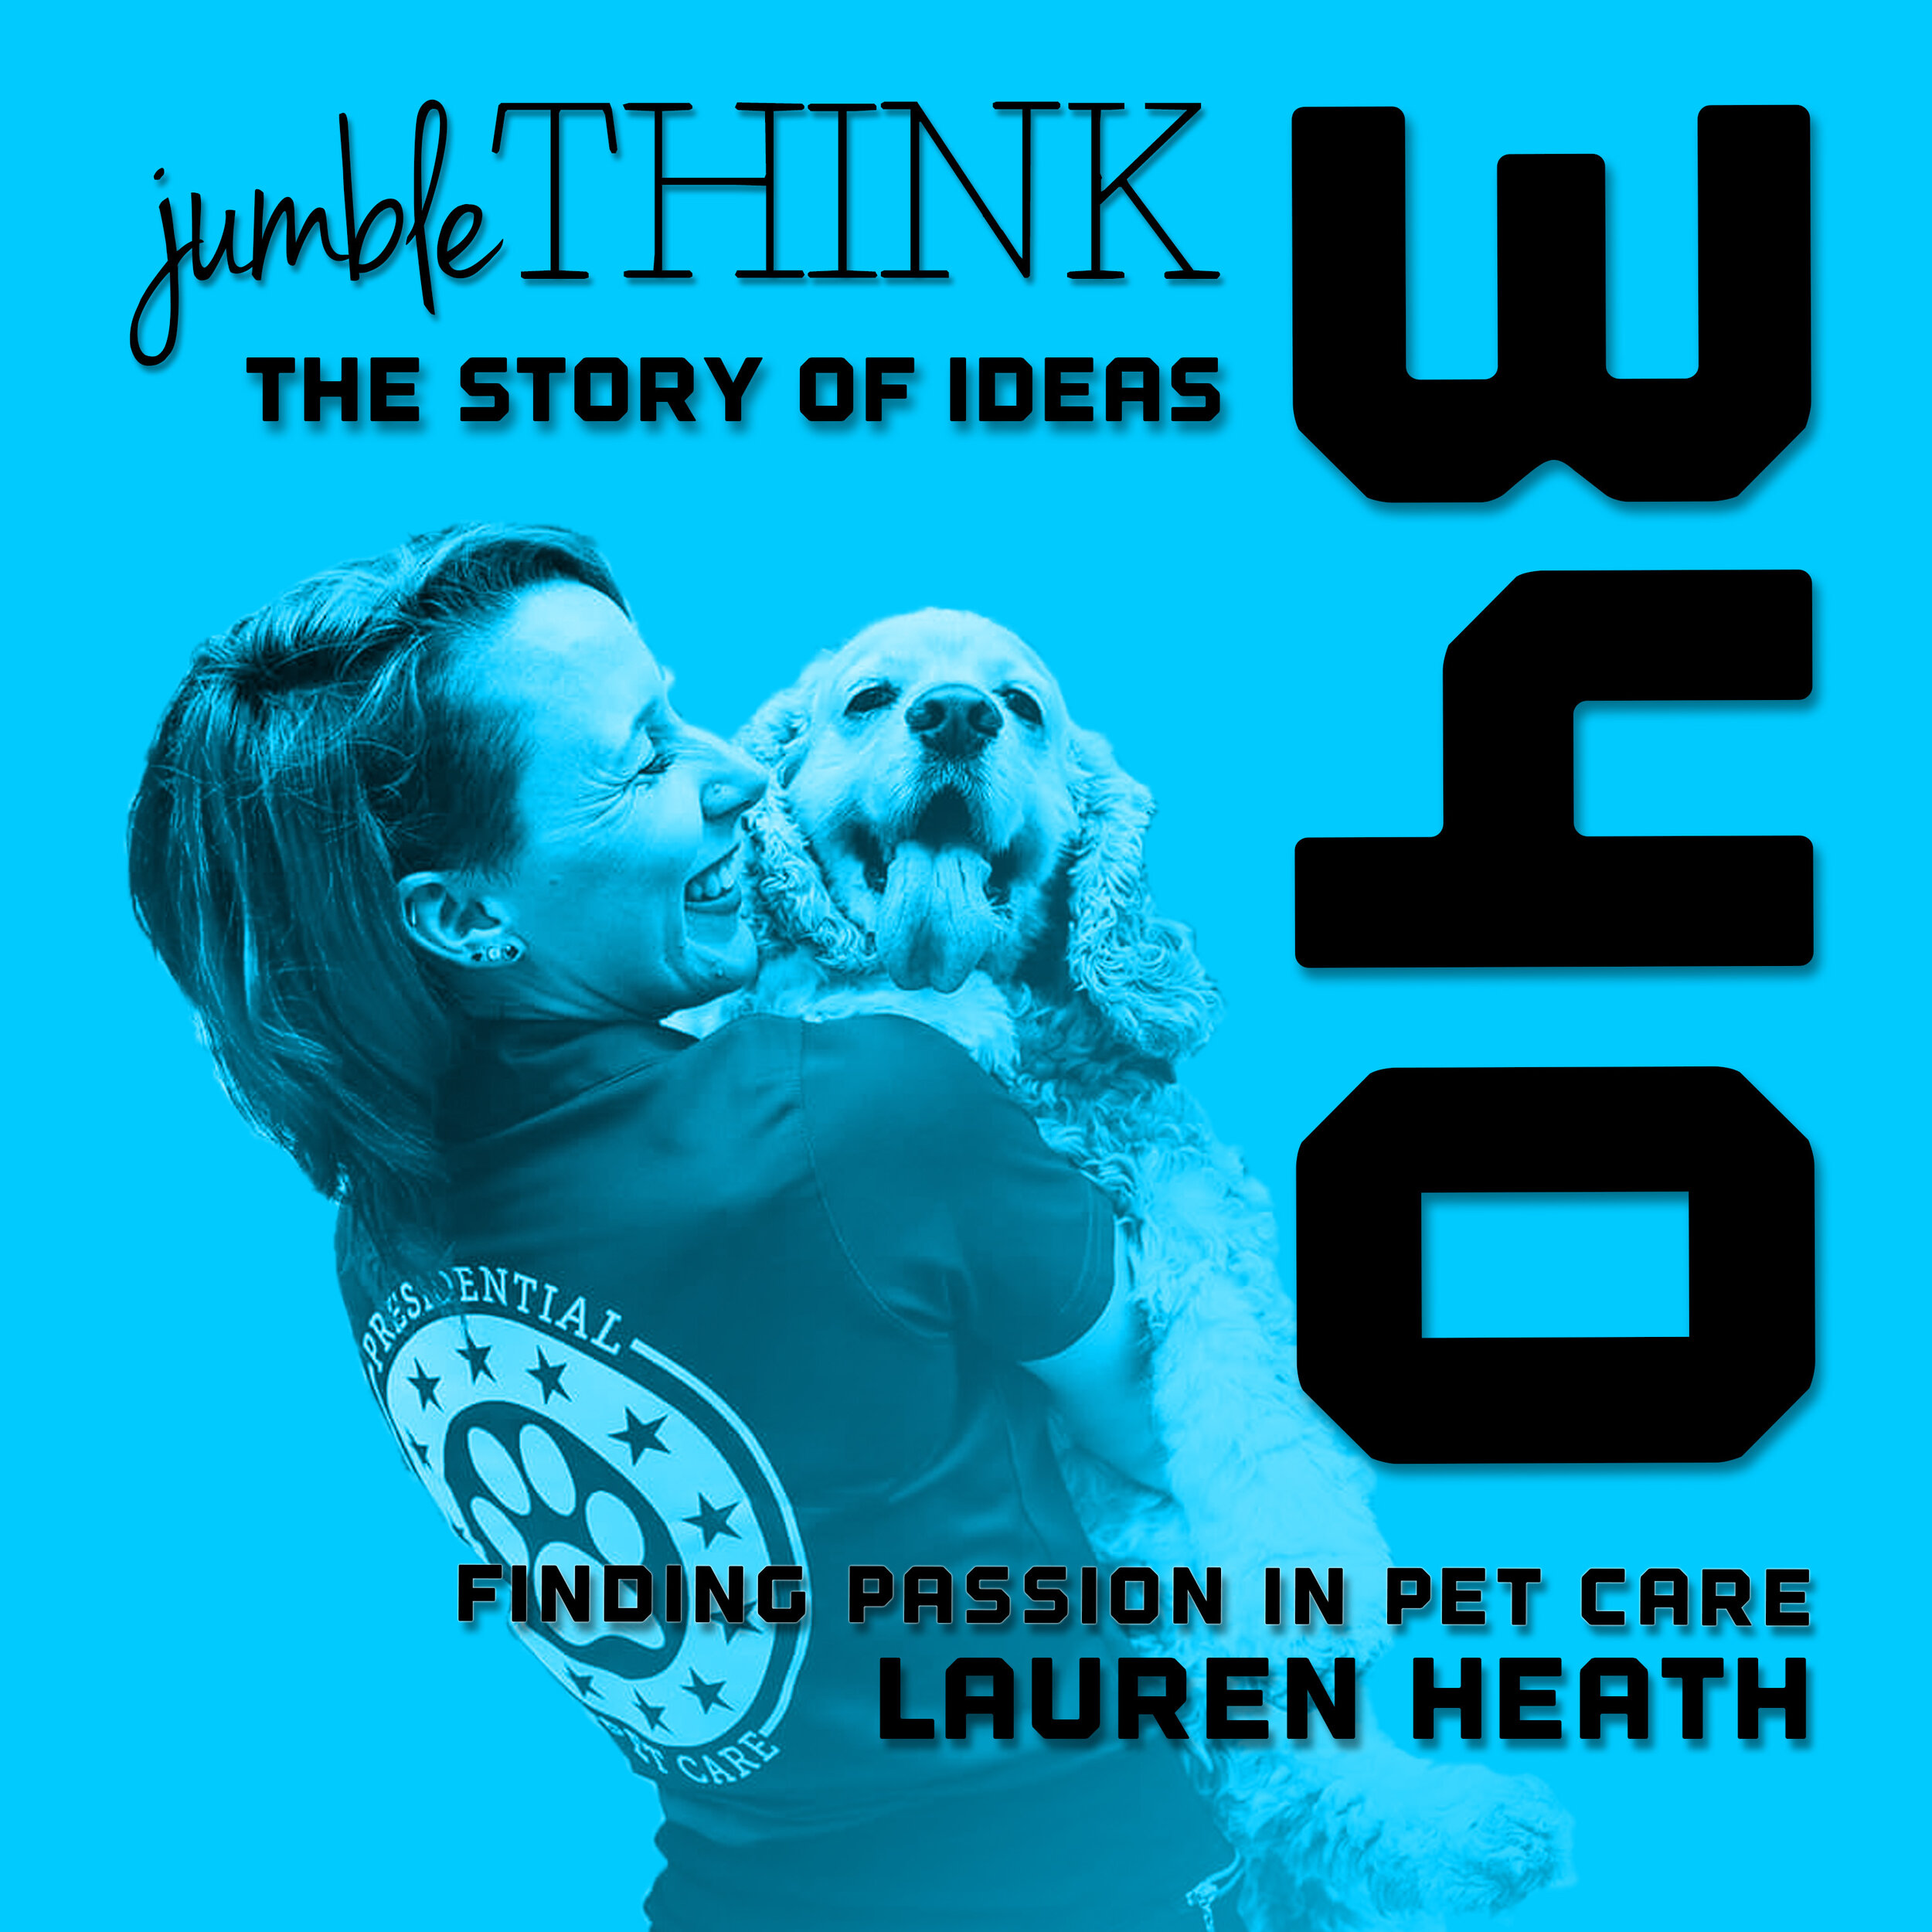 Finding Passion in Pet Care